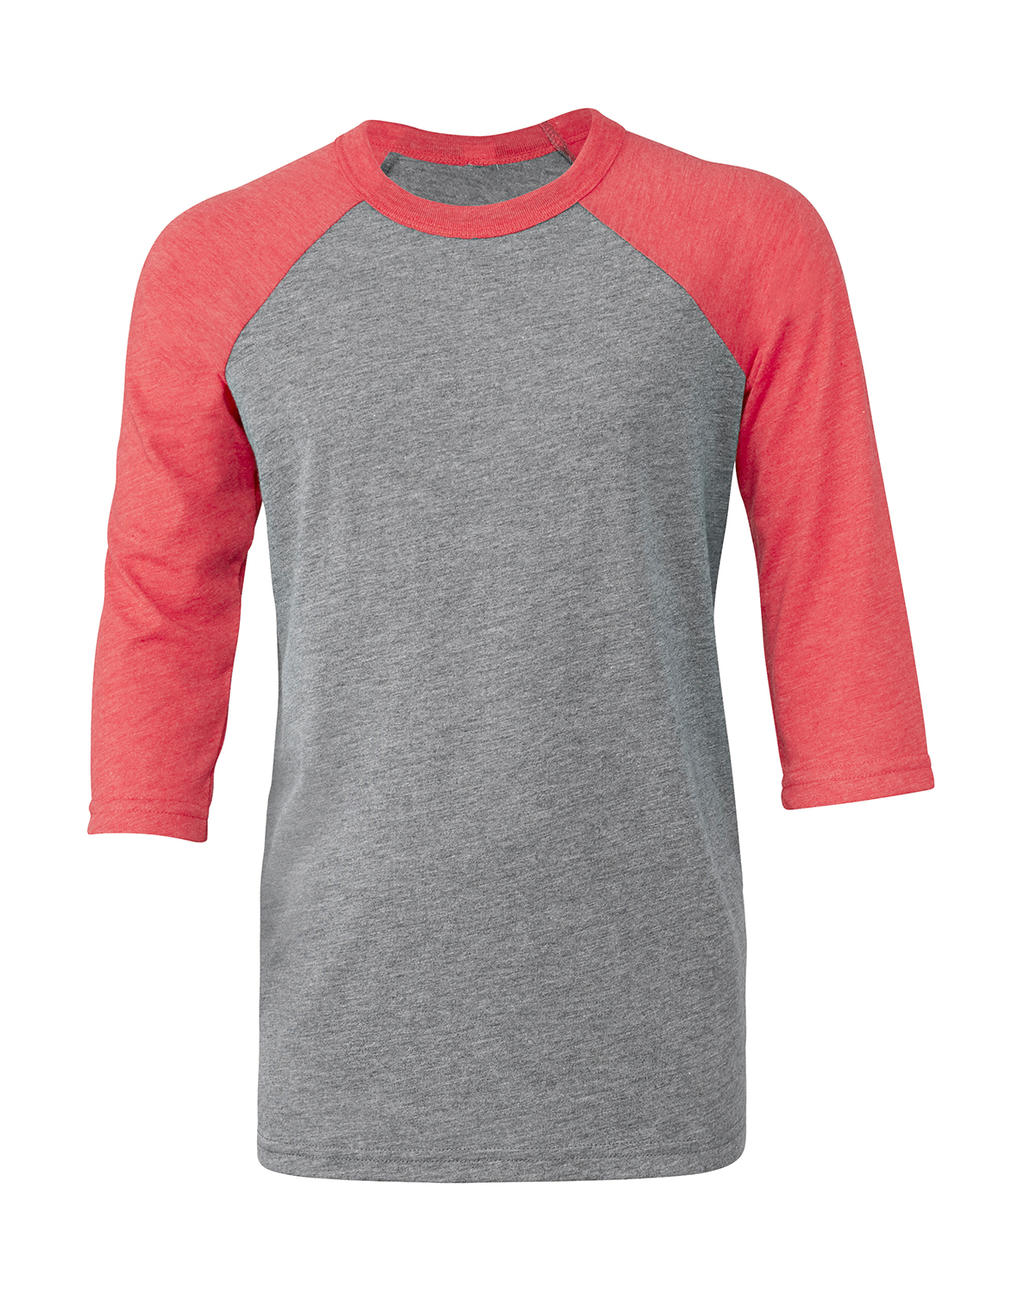  Youth 3/4 Sleeve Baseball Tee in Farbe Grey/Red Triblend